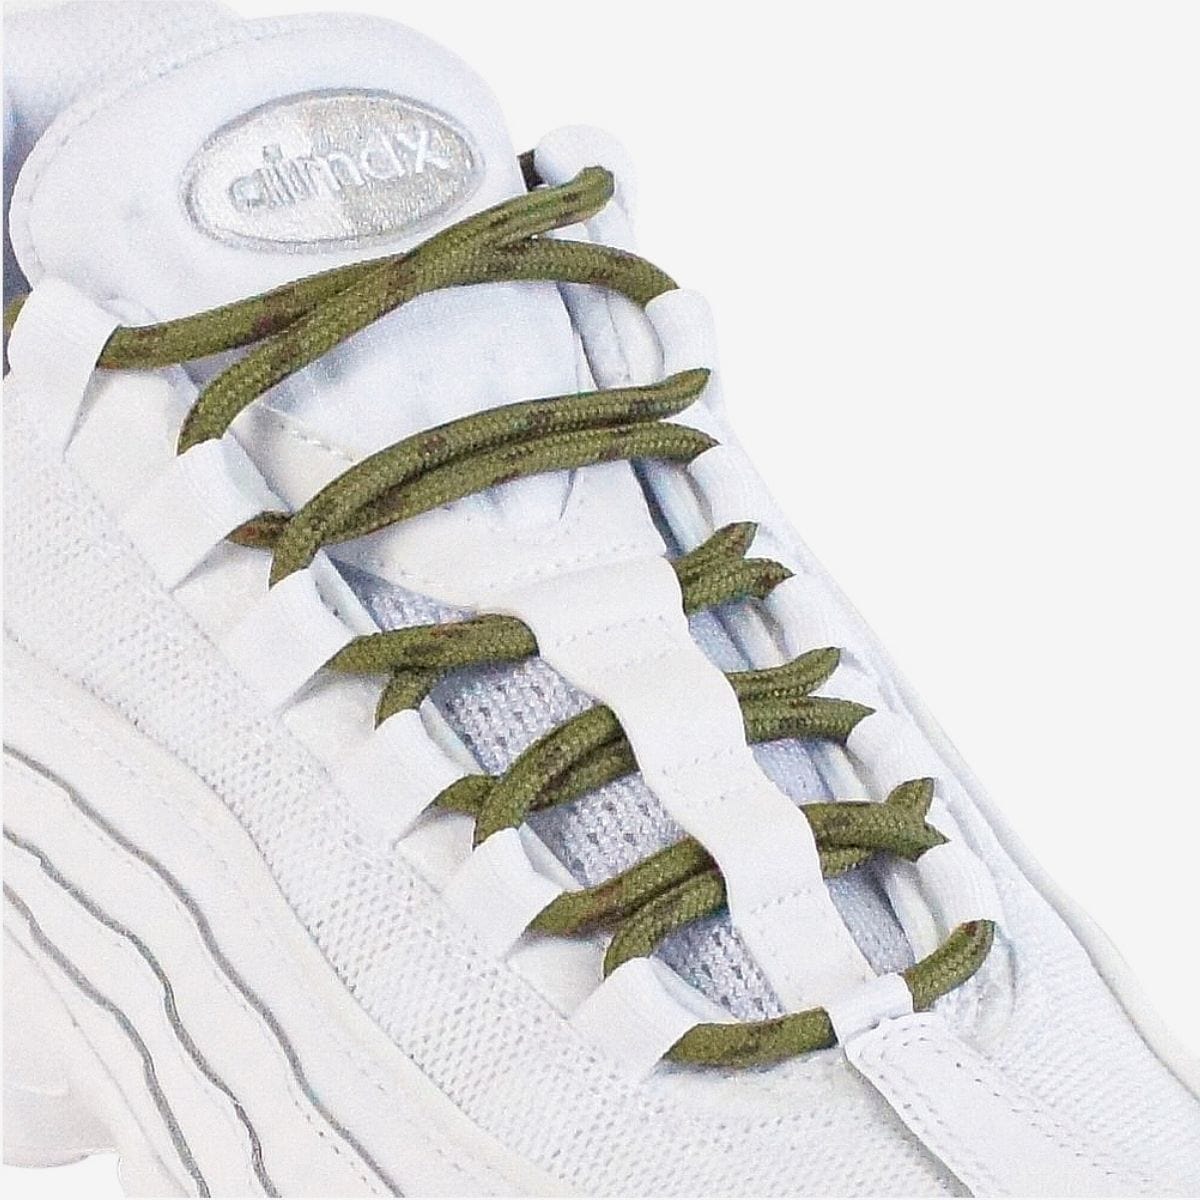 walking-shoe-laces-online-in-australia-colour-army-green-and-brown